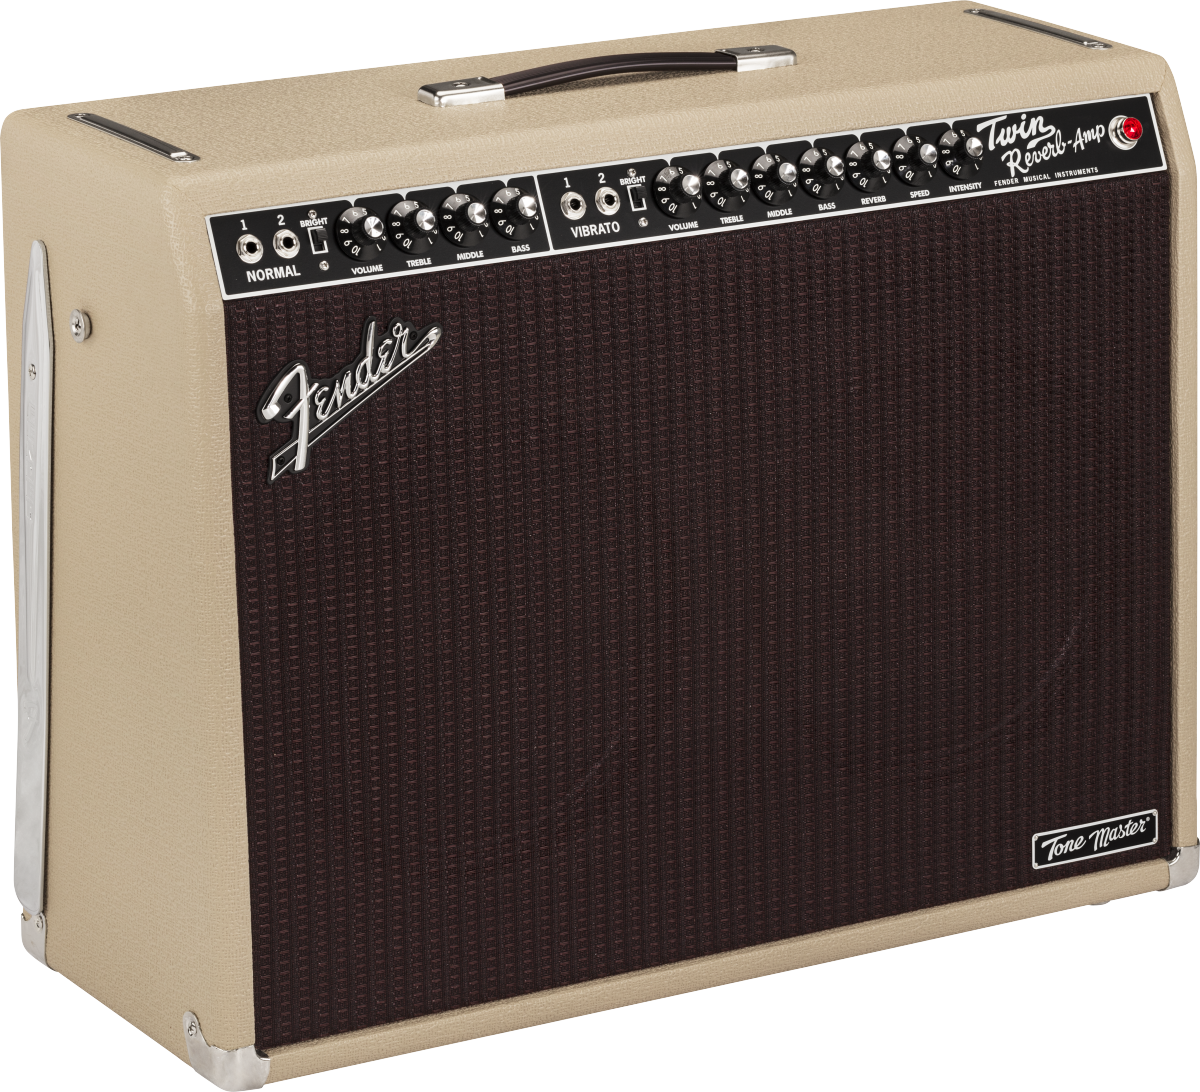 Fender Tone Master Twin Reverb 200w 2x12 Blonde - Electric guitar combo amp - Main picture